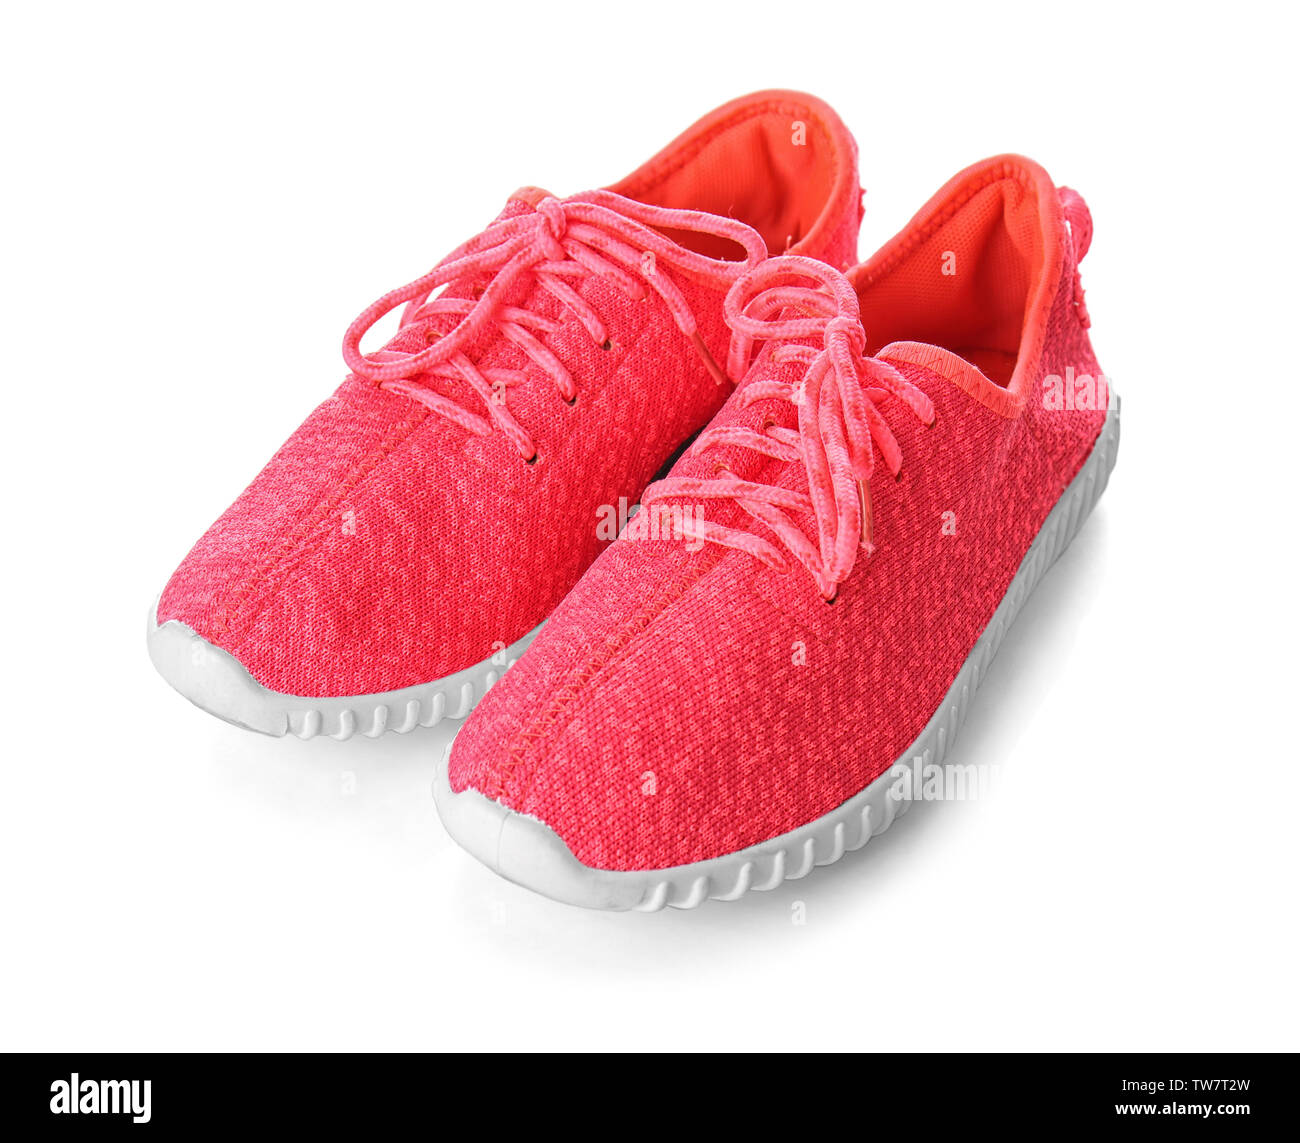 Pair of female sport shoes on white background Stock Photo